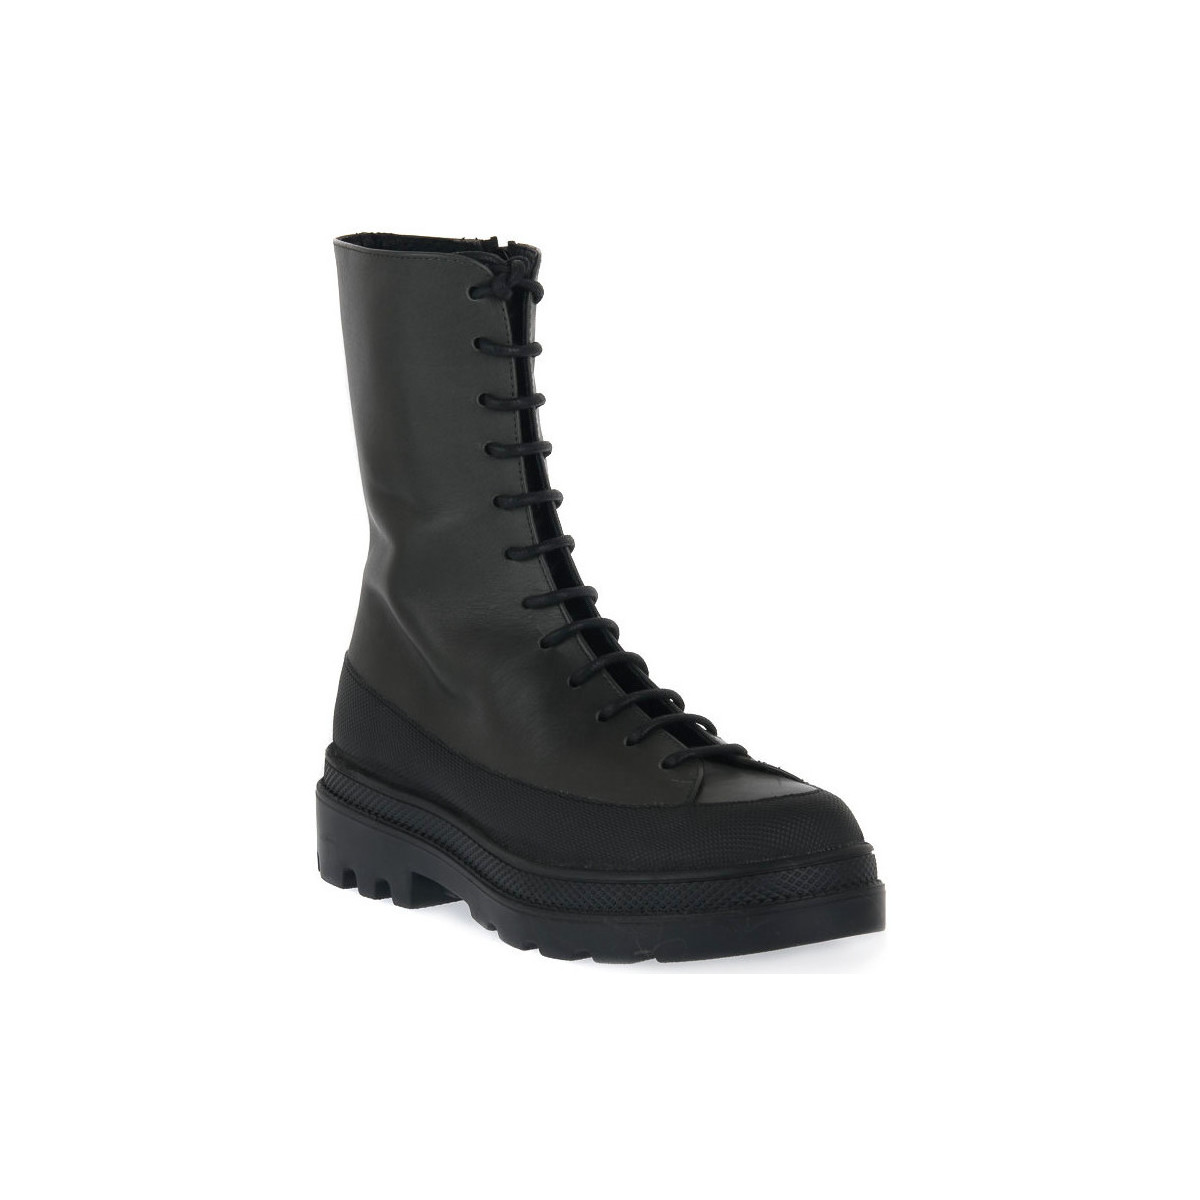 Chaussures Femme Wears a Specific Style Shoe to Seem Taller 318 VITELLO MILITARE Noir